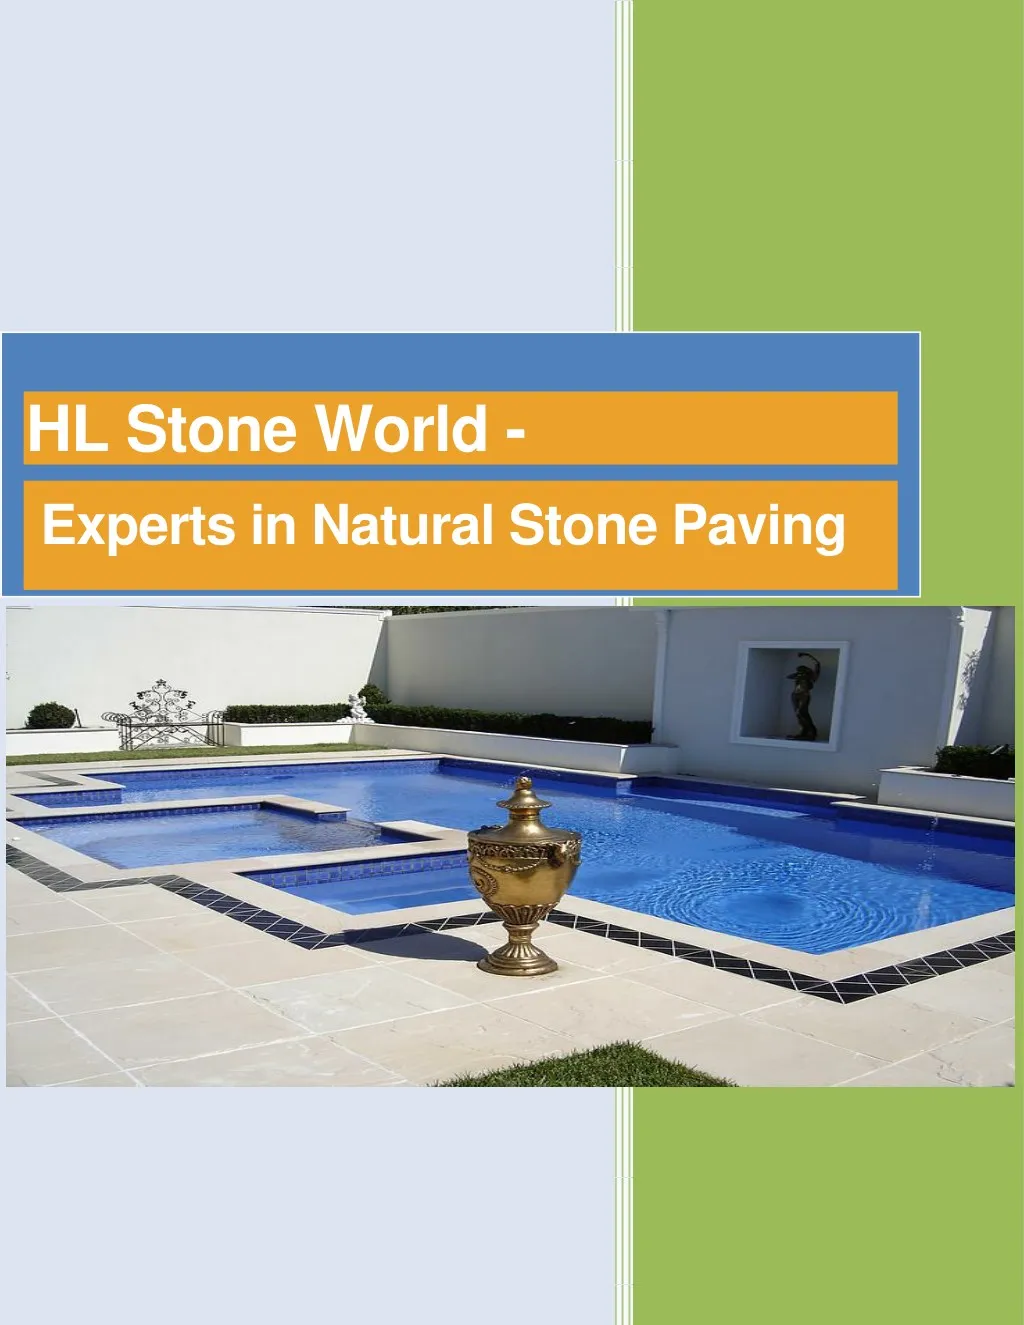 hl stone world experts in natural stone paving